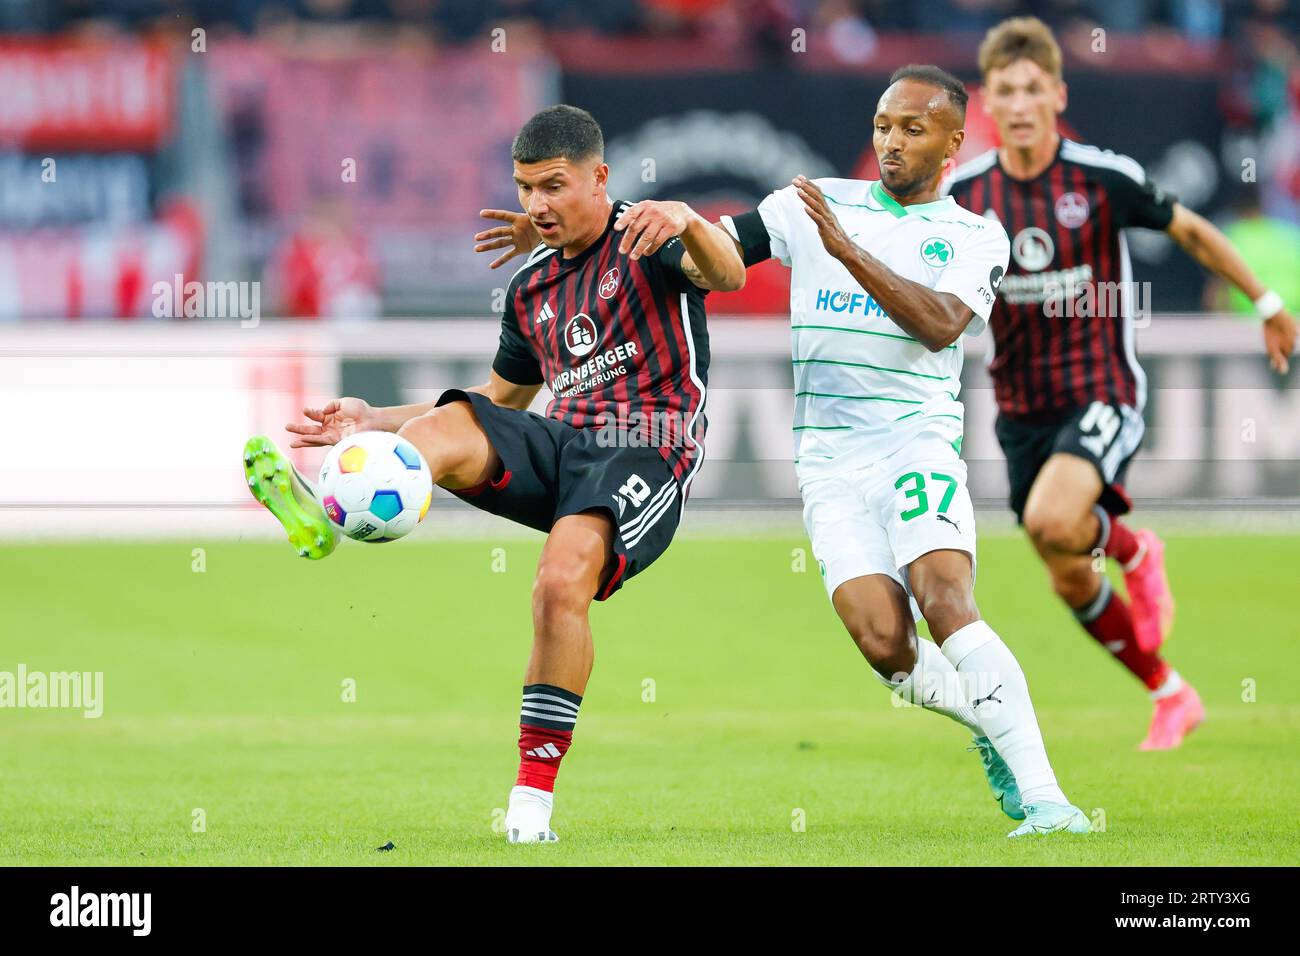 Nuremberg, Germany. 15th Sep, 2023. Soccer: 2nd Bundesliga, 1. FC Nürnberg - SpVgg Greuther Fürth, Matchday 6, Max Morlock Stadium. Nuremberg's Taylan Duman (l) and Fürth's Julian Green (M) fight for the ball. Credit: Daniel Löb/dpa - IMPORTANT NOTE: In accordance with the requirements of the DFL Deutsche Fußball Liga and the DFB Deutscher Fußball-Bund, it is prohibited to use or have used photographs taken in the stadium and/or of the match in the form of sequence pictures and/or video-like photo series./dpa/Alamy Live News Stock Photo